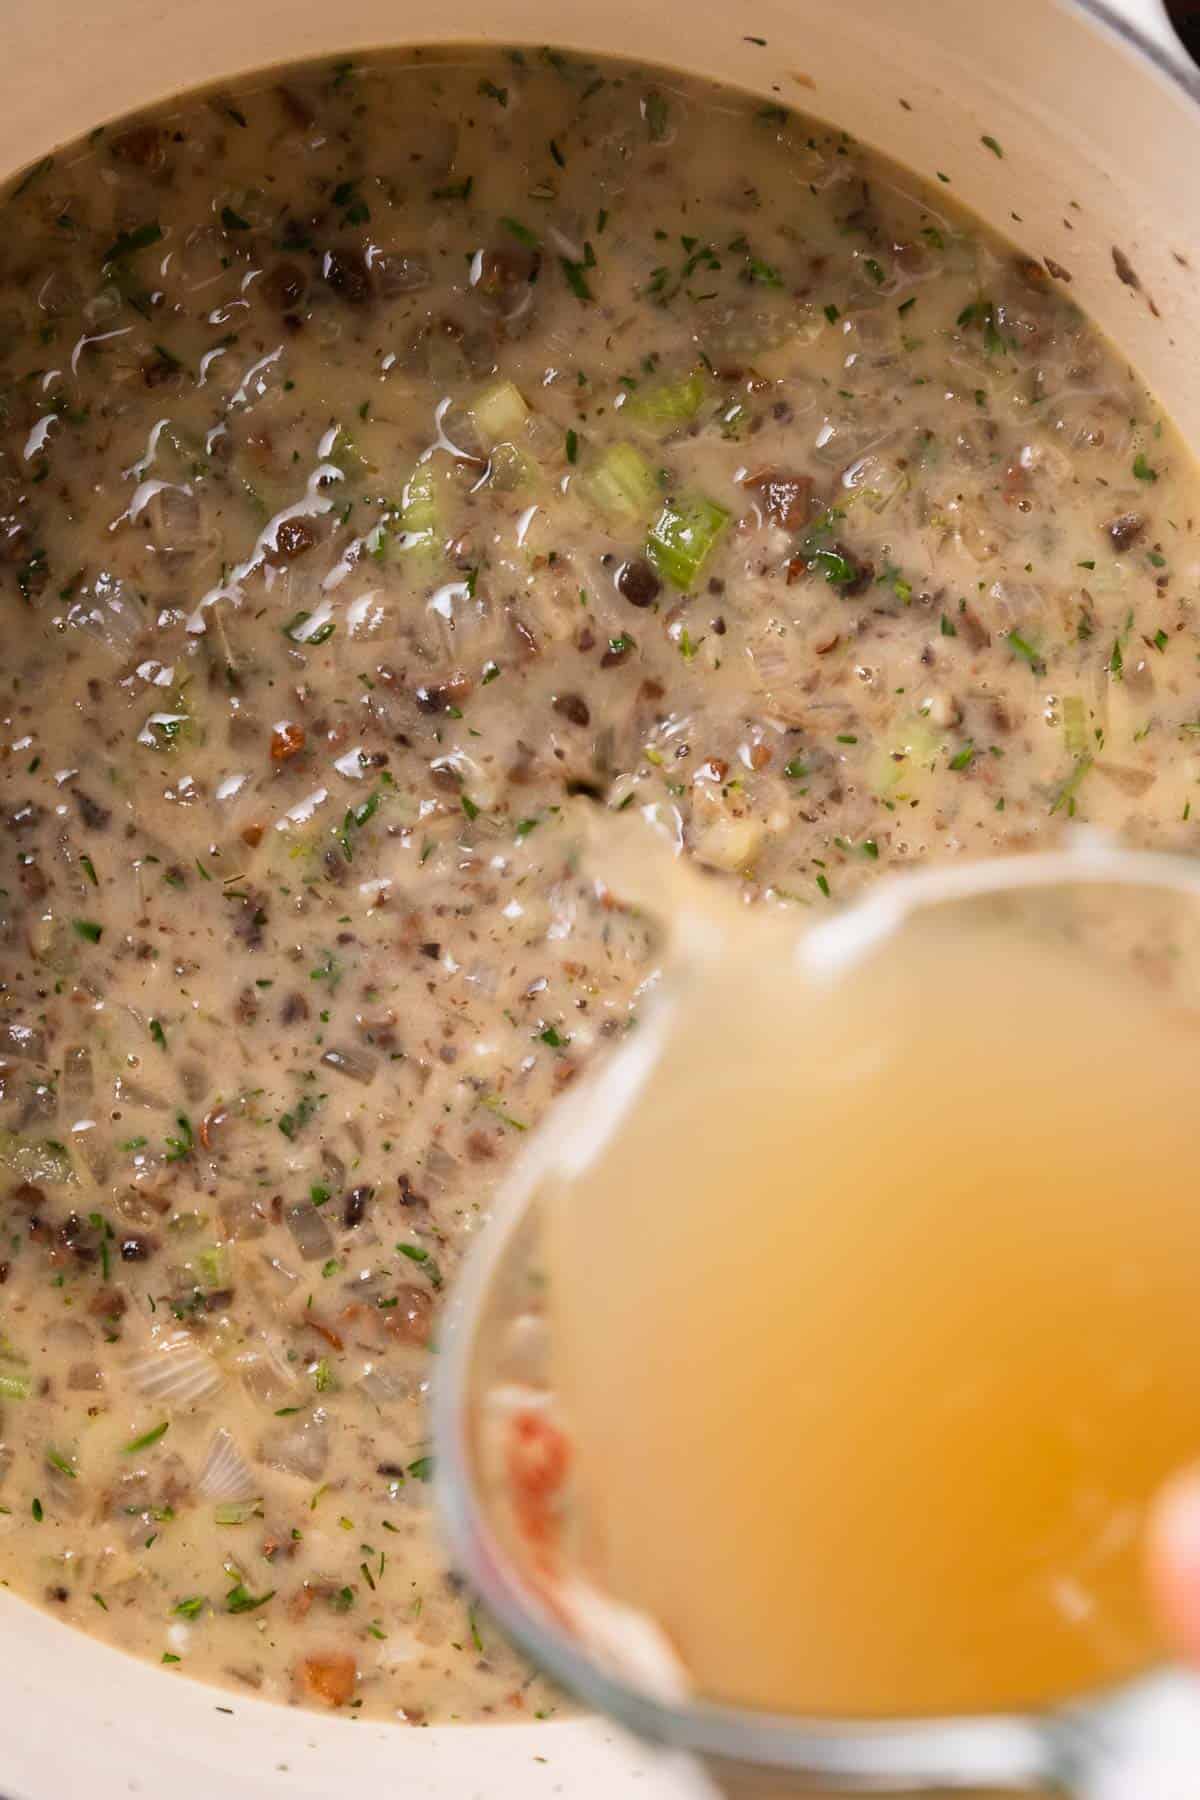 Chicken broth being poured into the sauce.